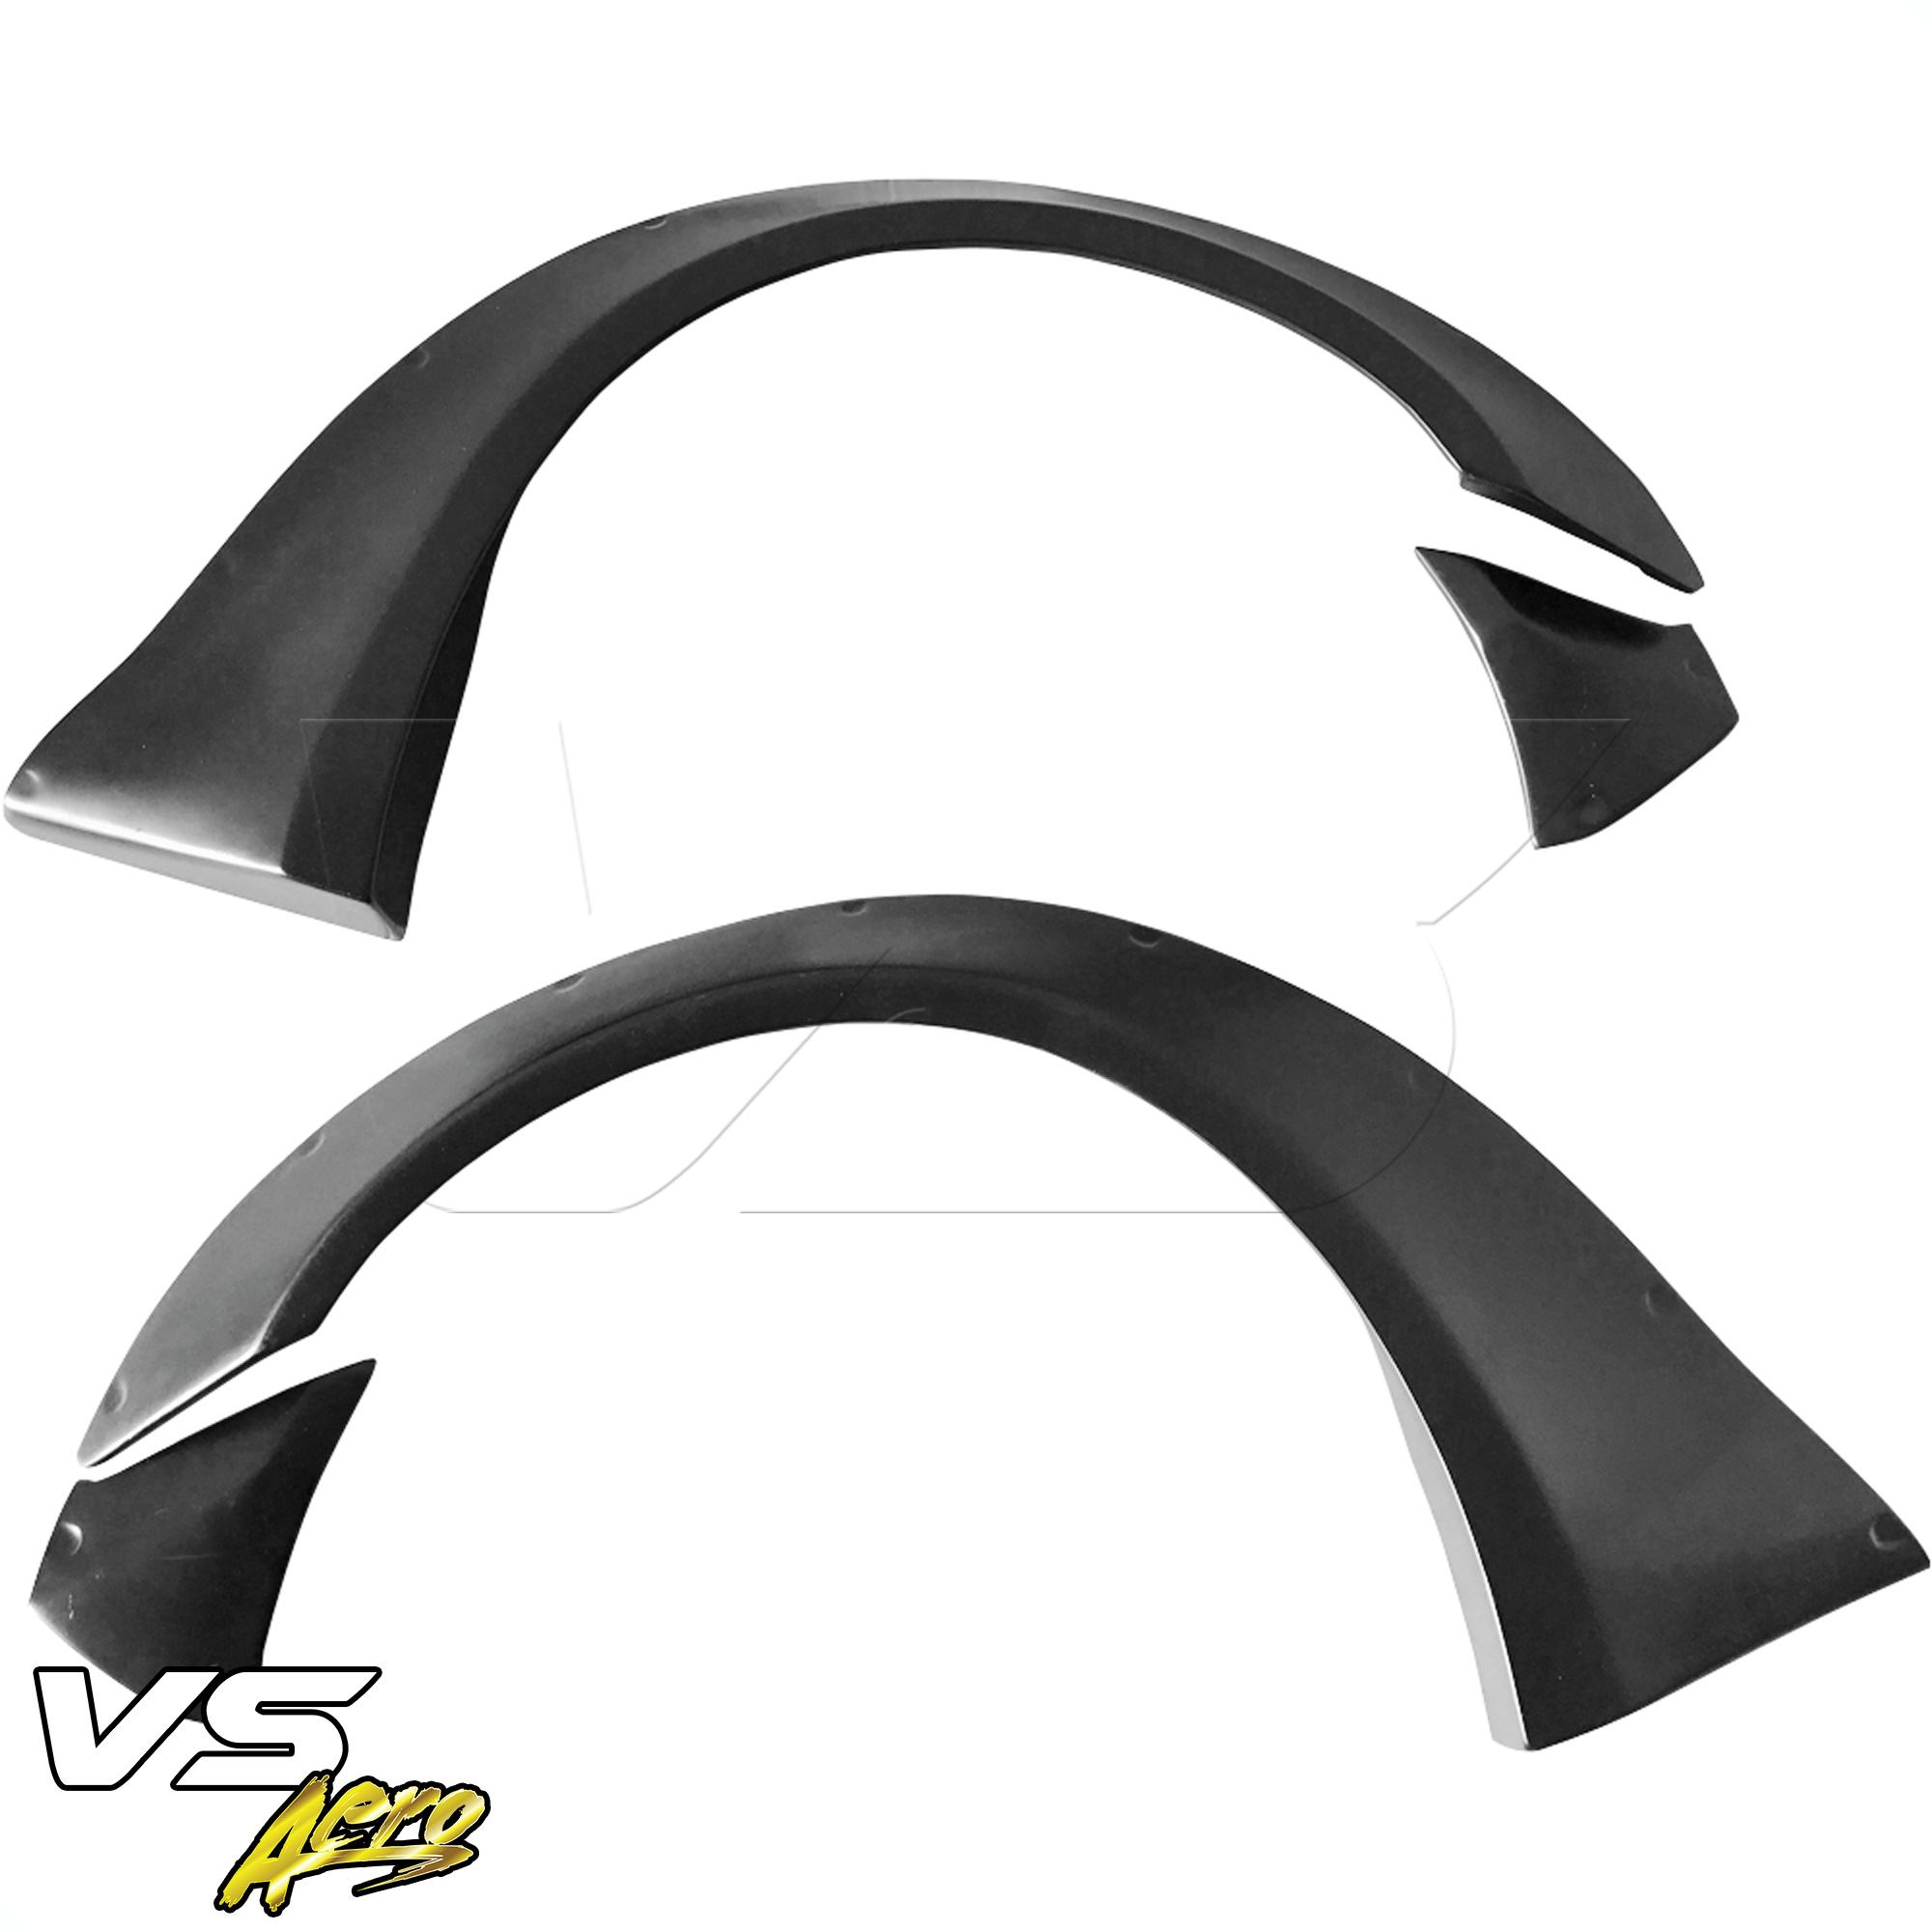 VSaero FRP LBPE Wide Body Fender Flares (front) 4pc > Infiniti G37 Coupe 2008-2015 > 2dr Coupe - Image 13